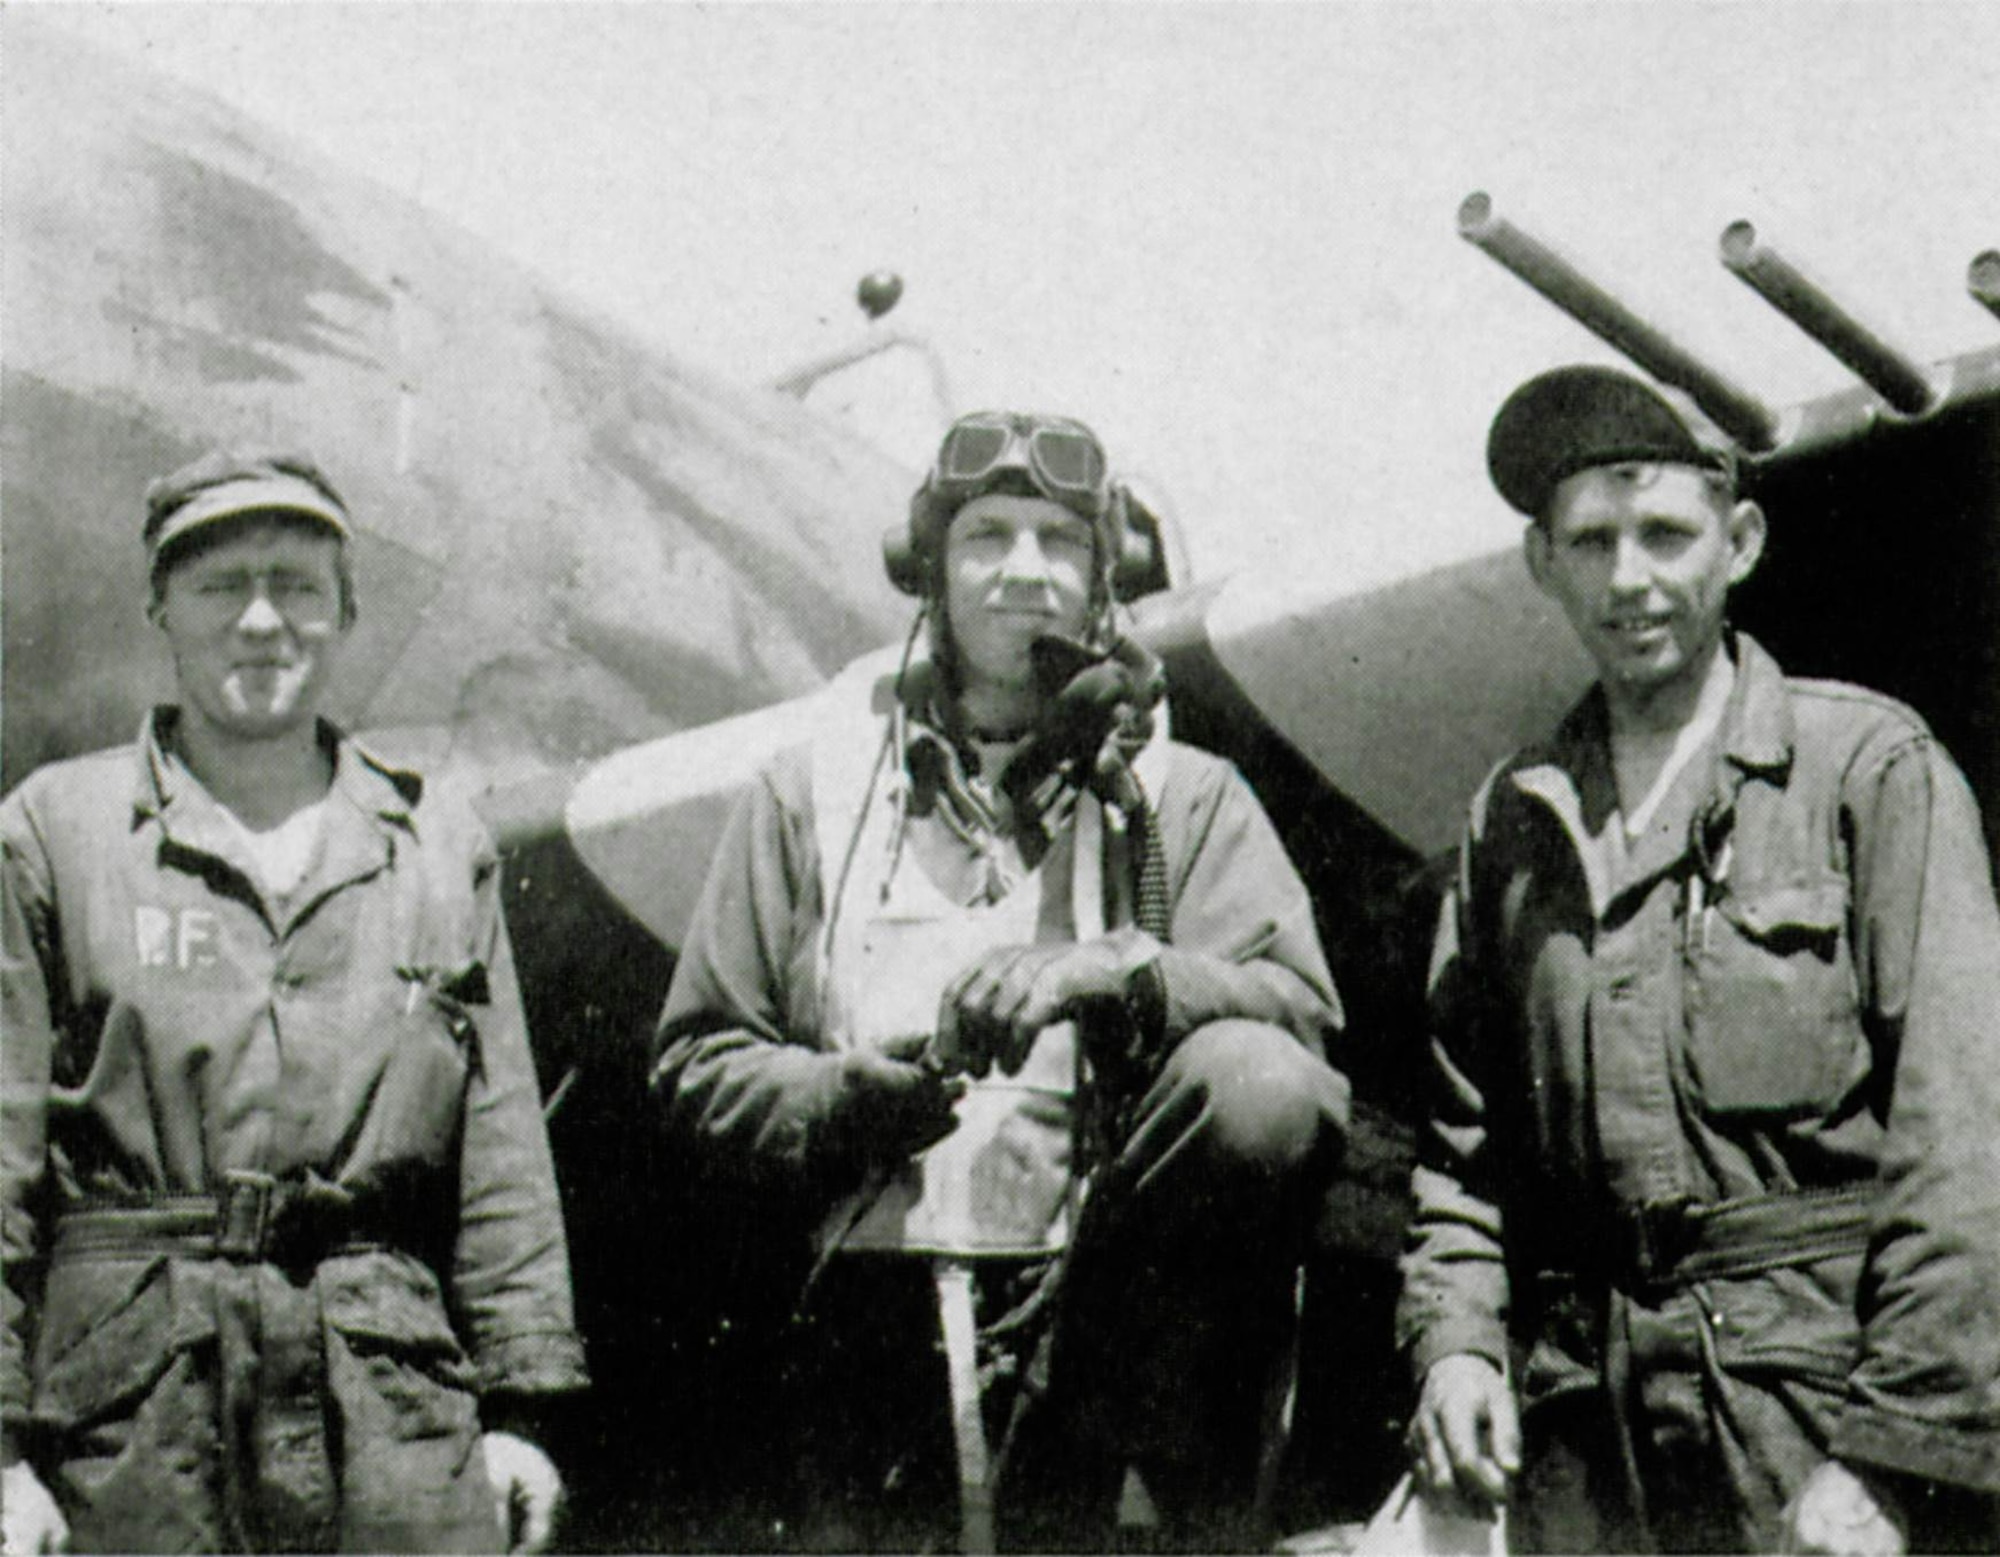 Group Commander Col. Bingham T. Kleine was the wartime commander of the 371st Fighter Group.  He is shown here in between two members of his ground crew, likely men from the 404th Fighter Squadron.  The initial P.F. on the overall on the man at left suggest possibly Sgt. Percy M. Freer of that squadron.  This picture may have been taken on D-Day, just prior to the group’s first mission that day, with the famous black/white recognition stripes visible on the wing behind them.  (The Story of the 371st Fighter Group in the E.T.O.)